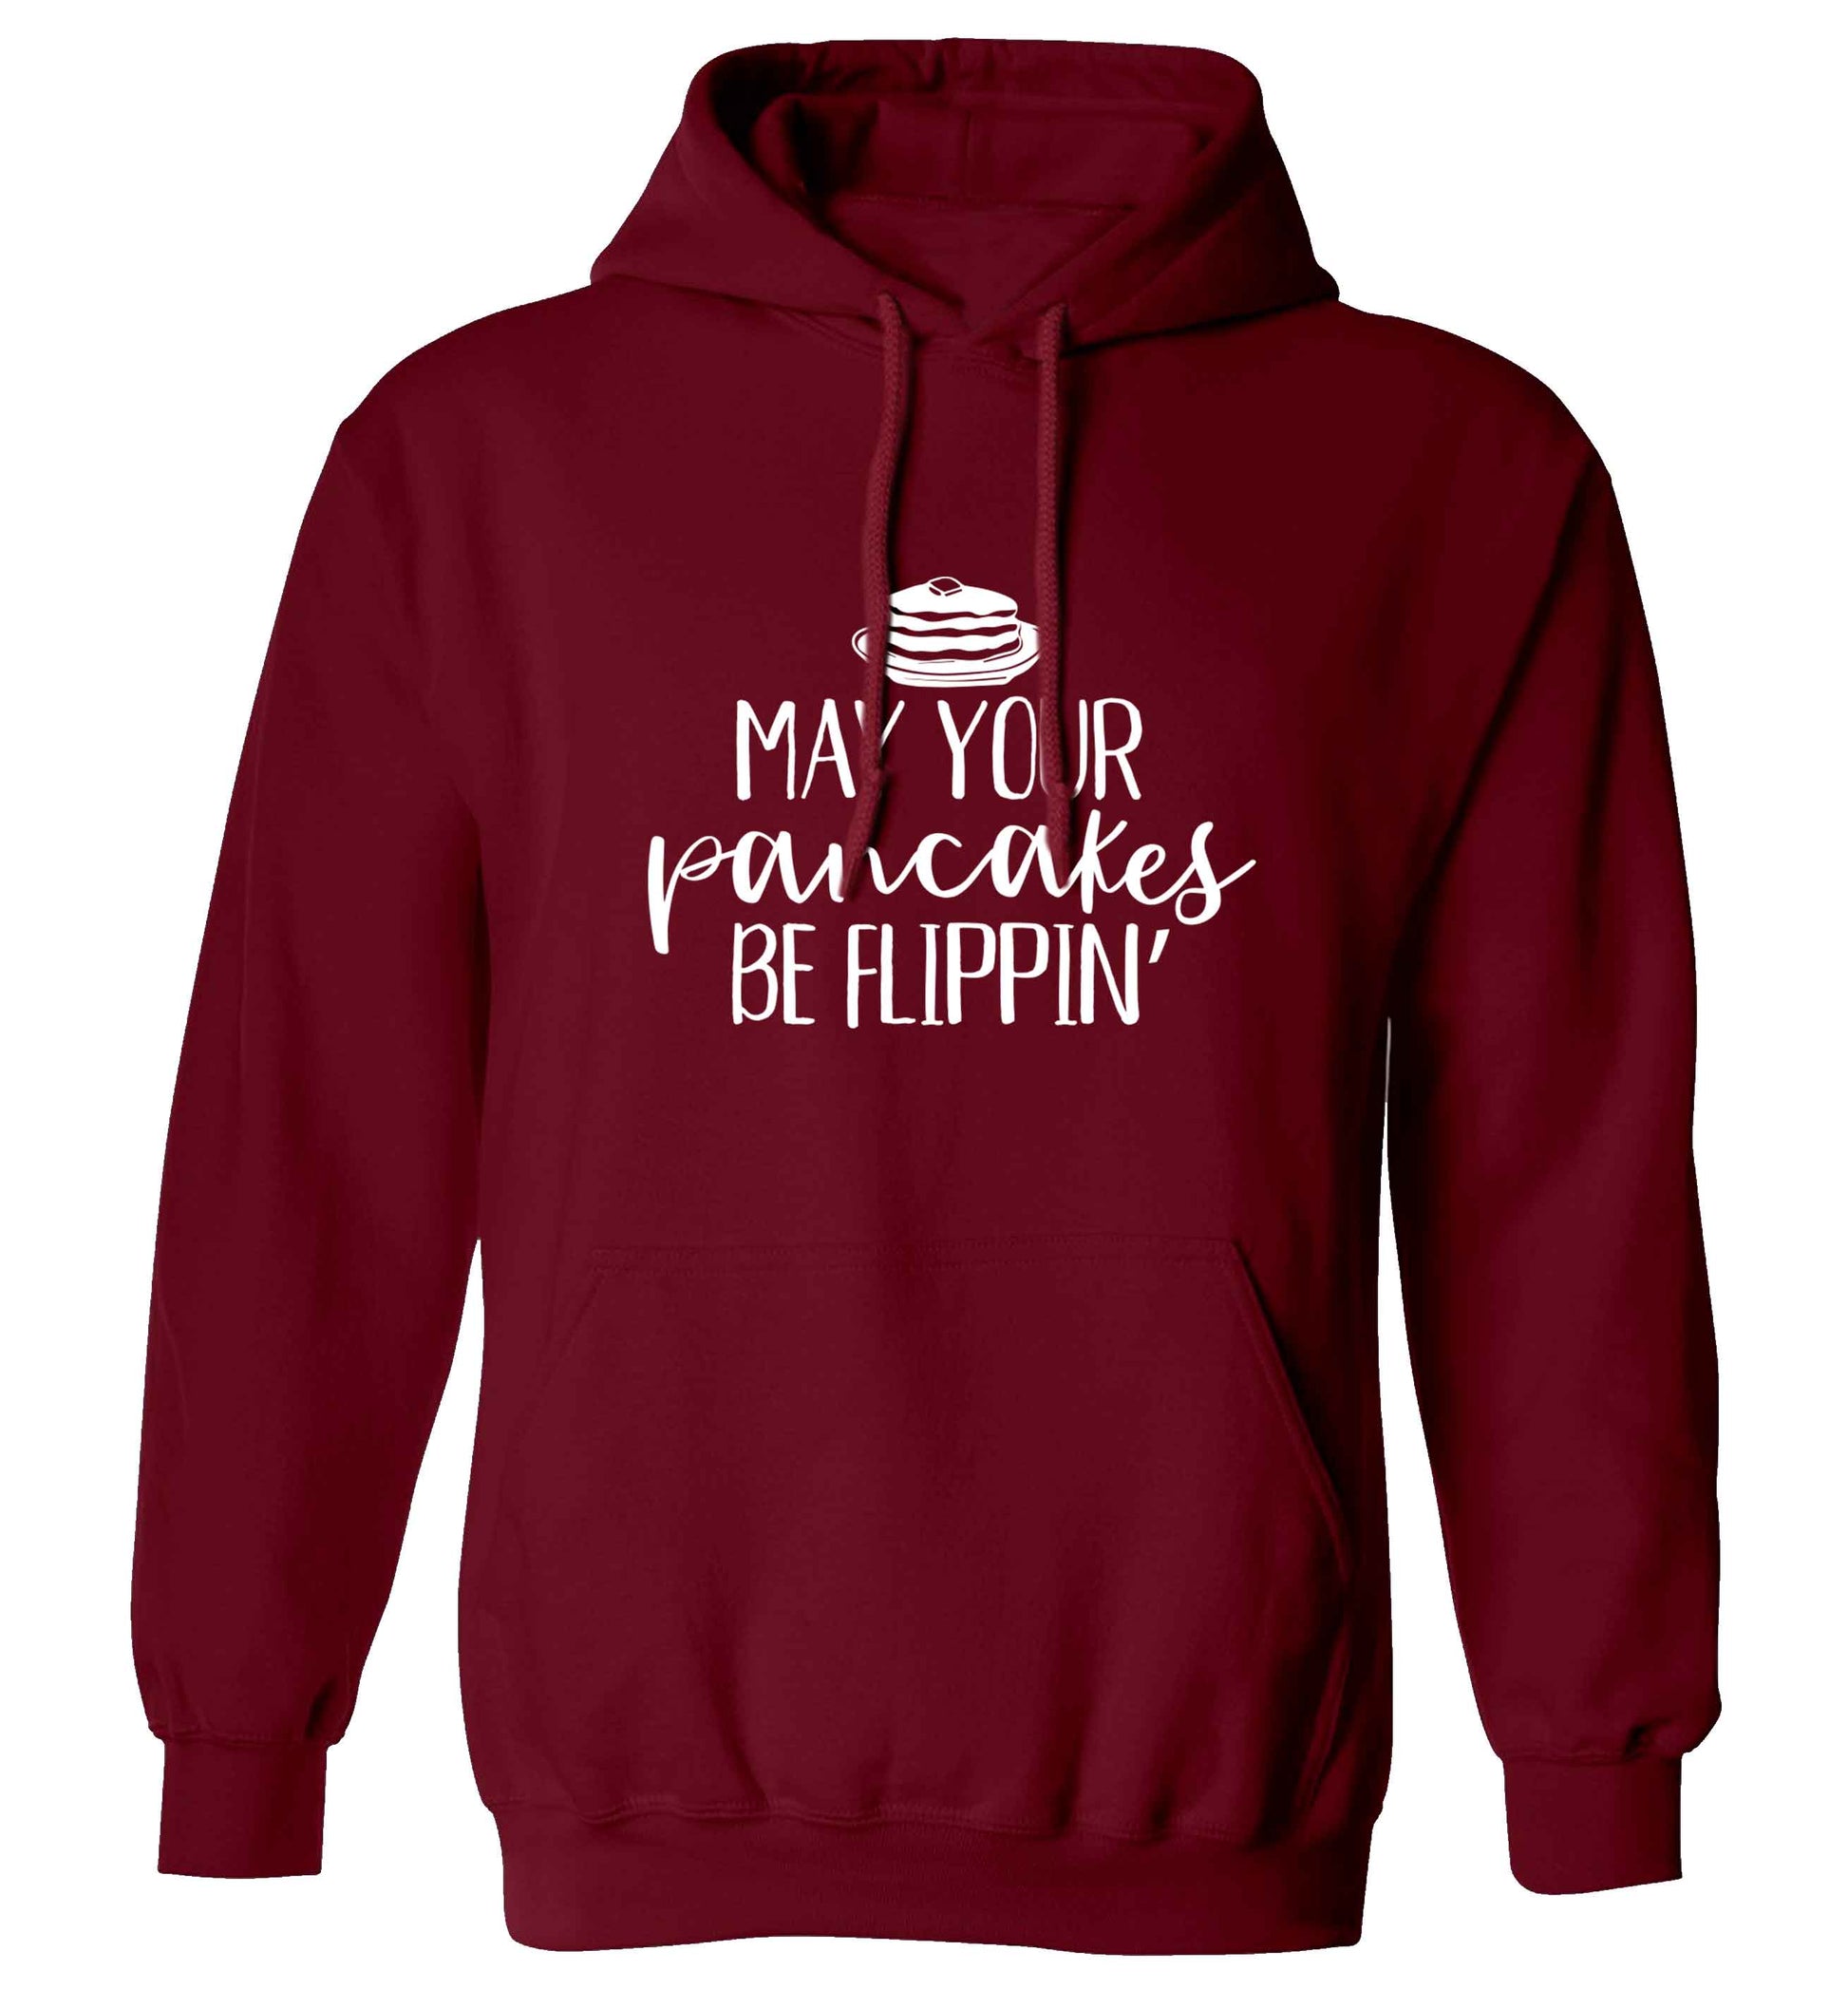 May your pancakes be flippin' adults unisex maroon hoodie 2XL